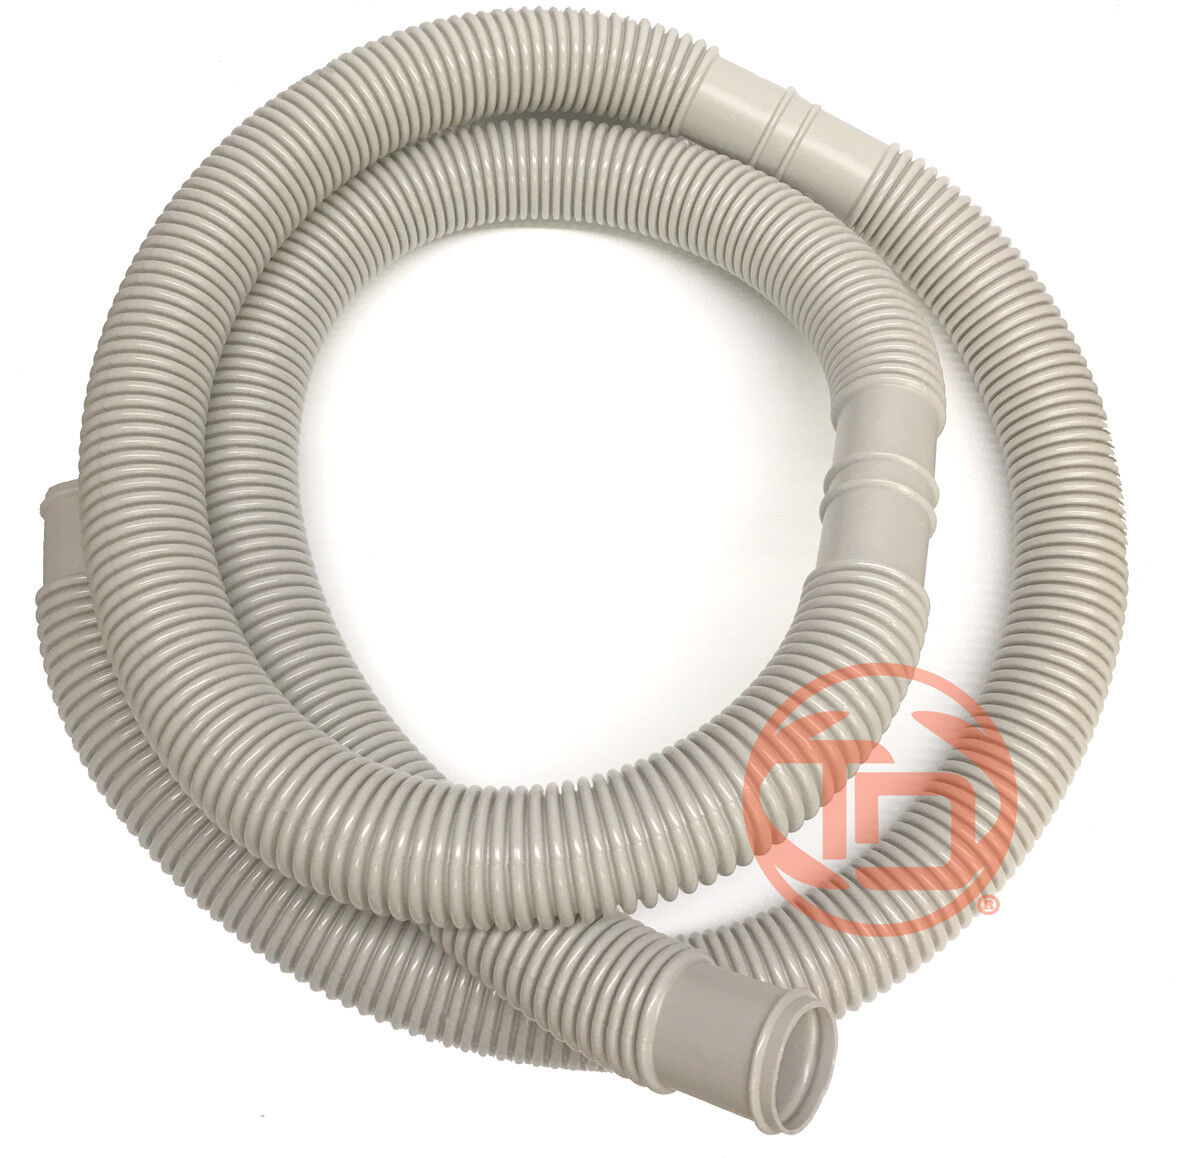 Max 53% OFF 24' FT 2021 model Above Ground Swimming Pool Connection 1- Filter Hose Pump